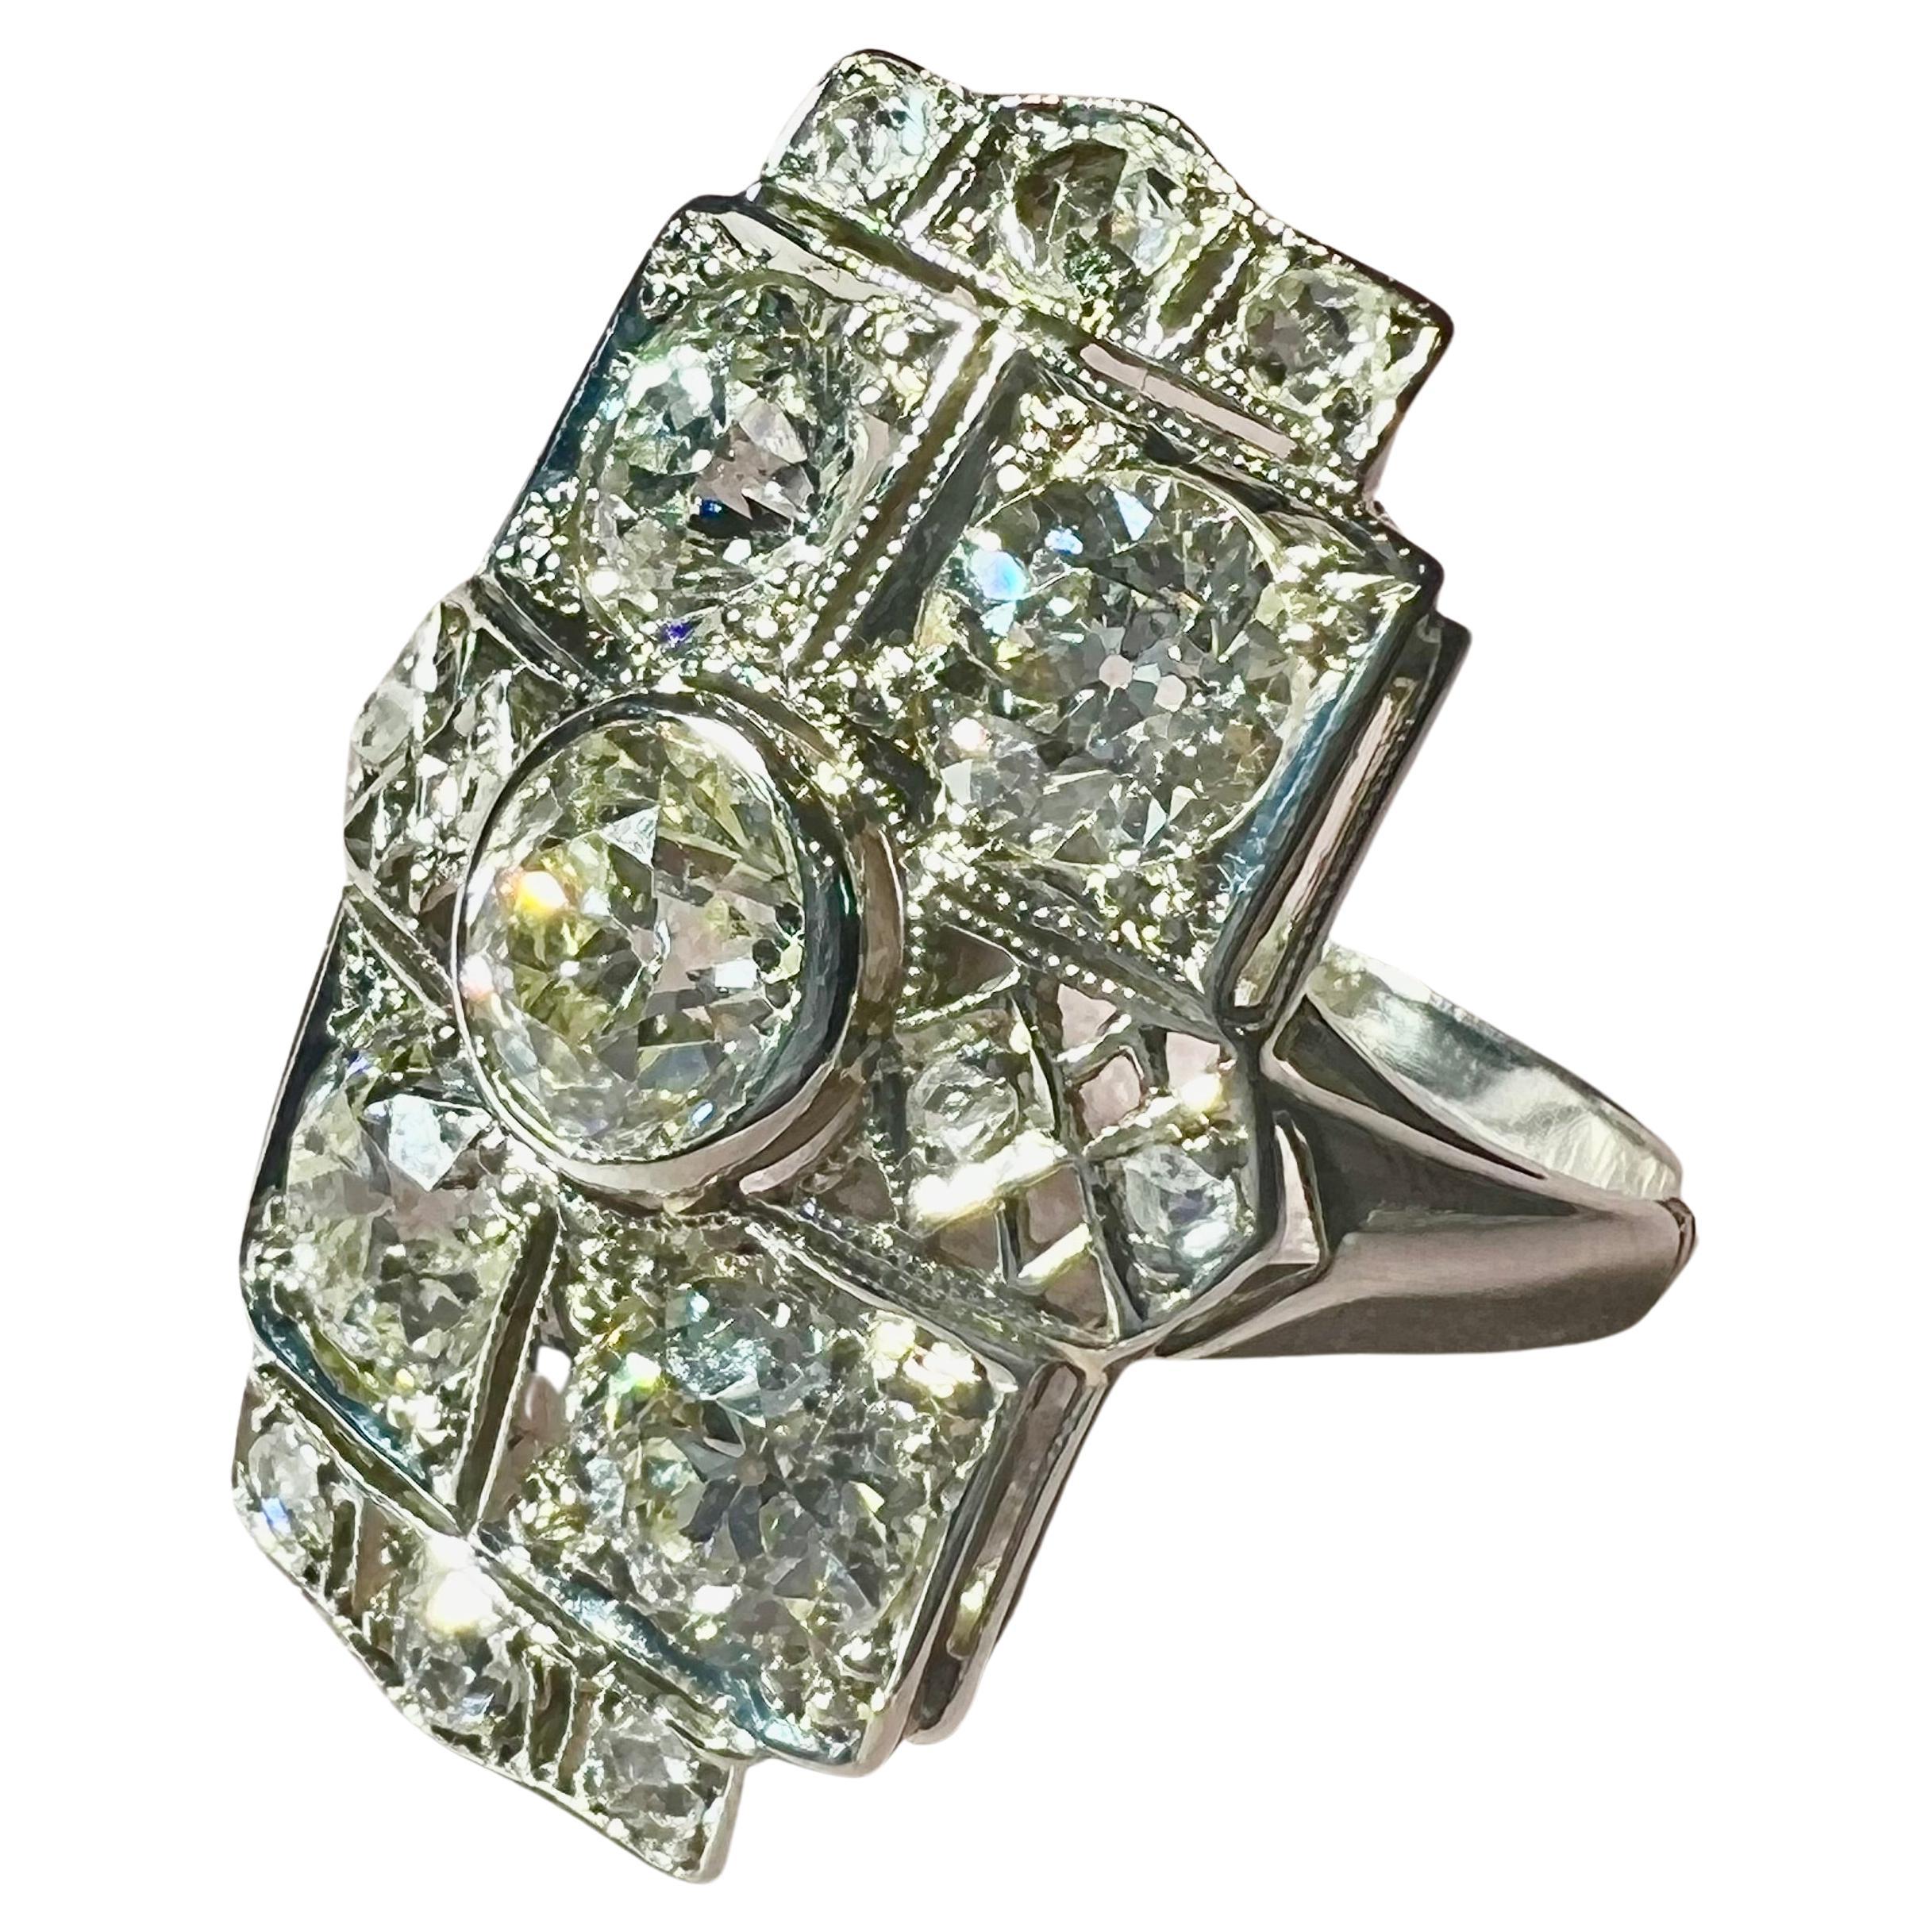  Art Deco , Platinum and 18ct Gold , Ring, Set with Old-Cut Diamonds, 1930 Period 